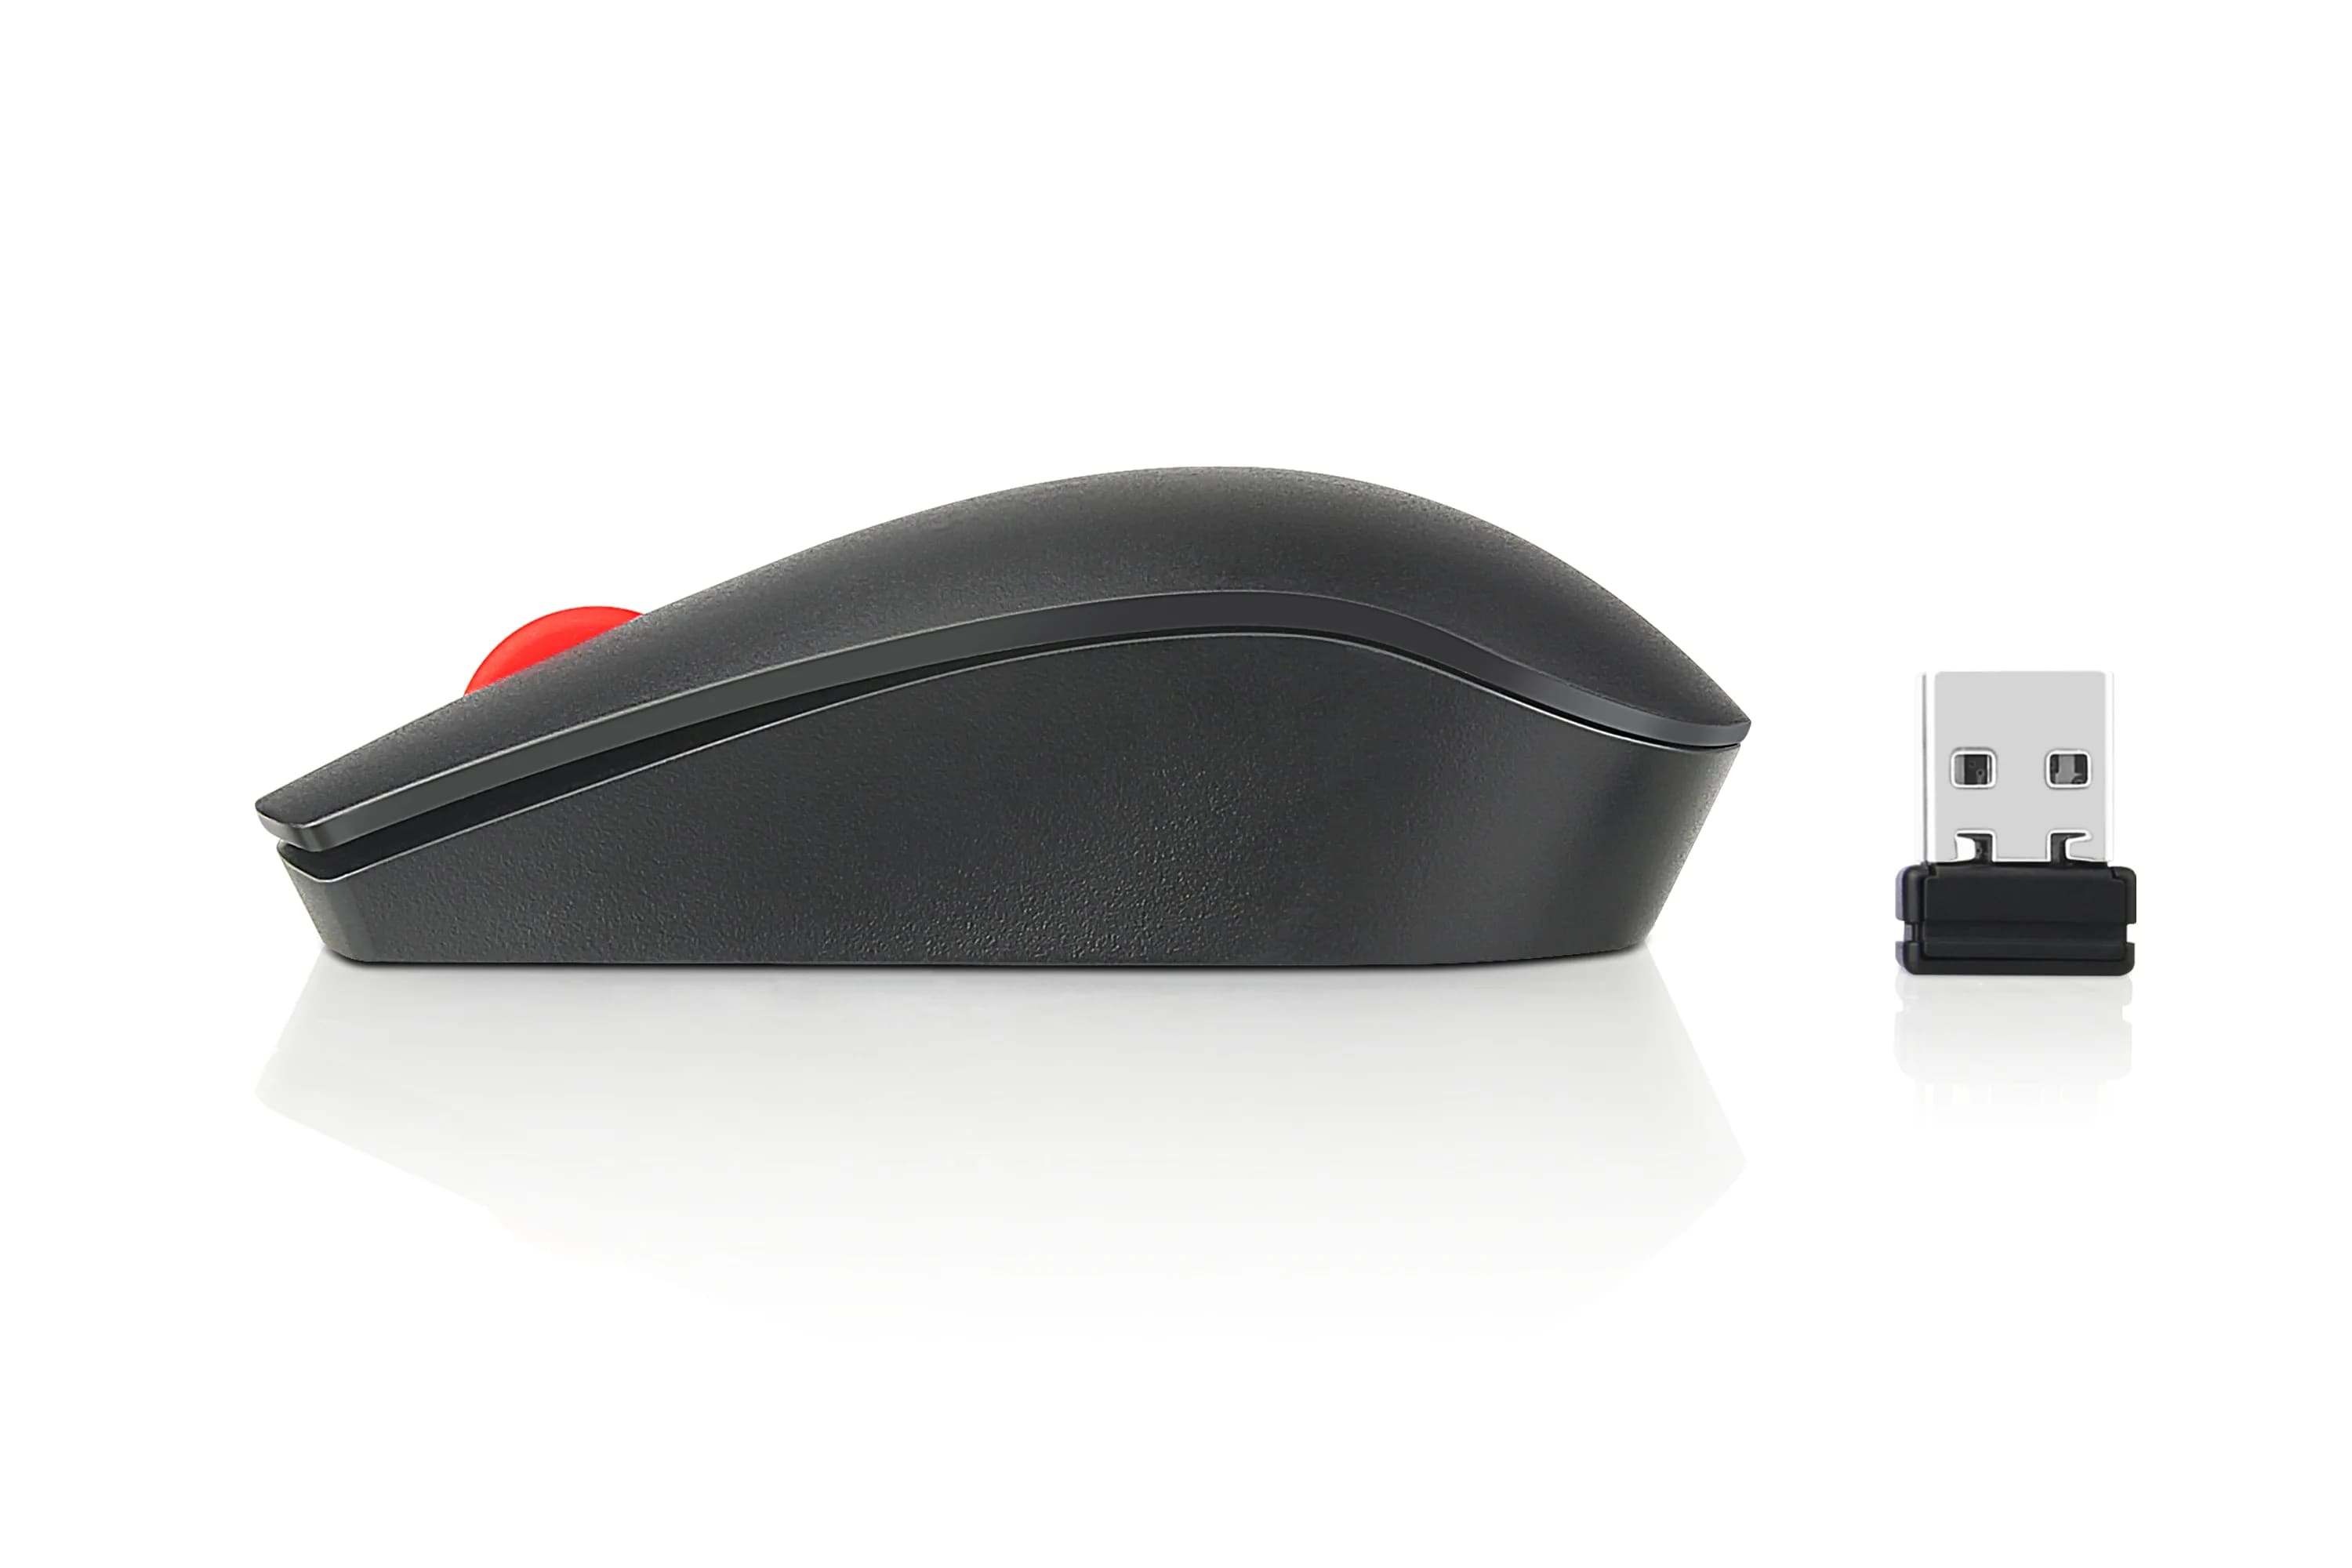 br-thinkpad-mouse-third